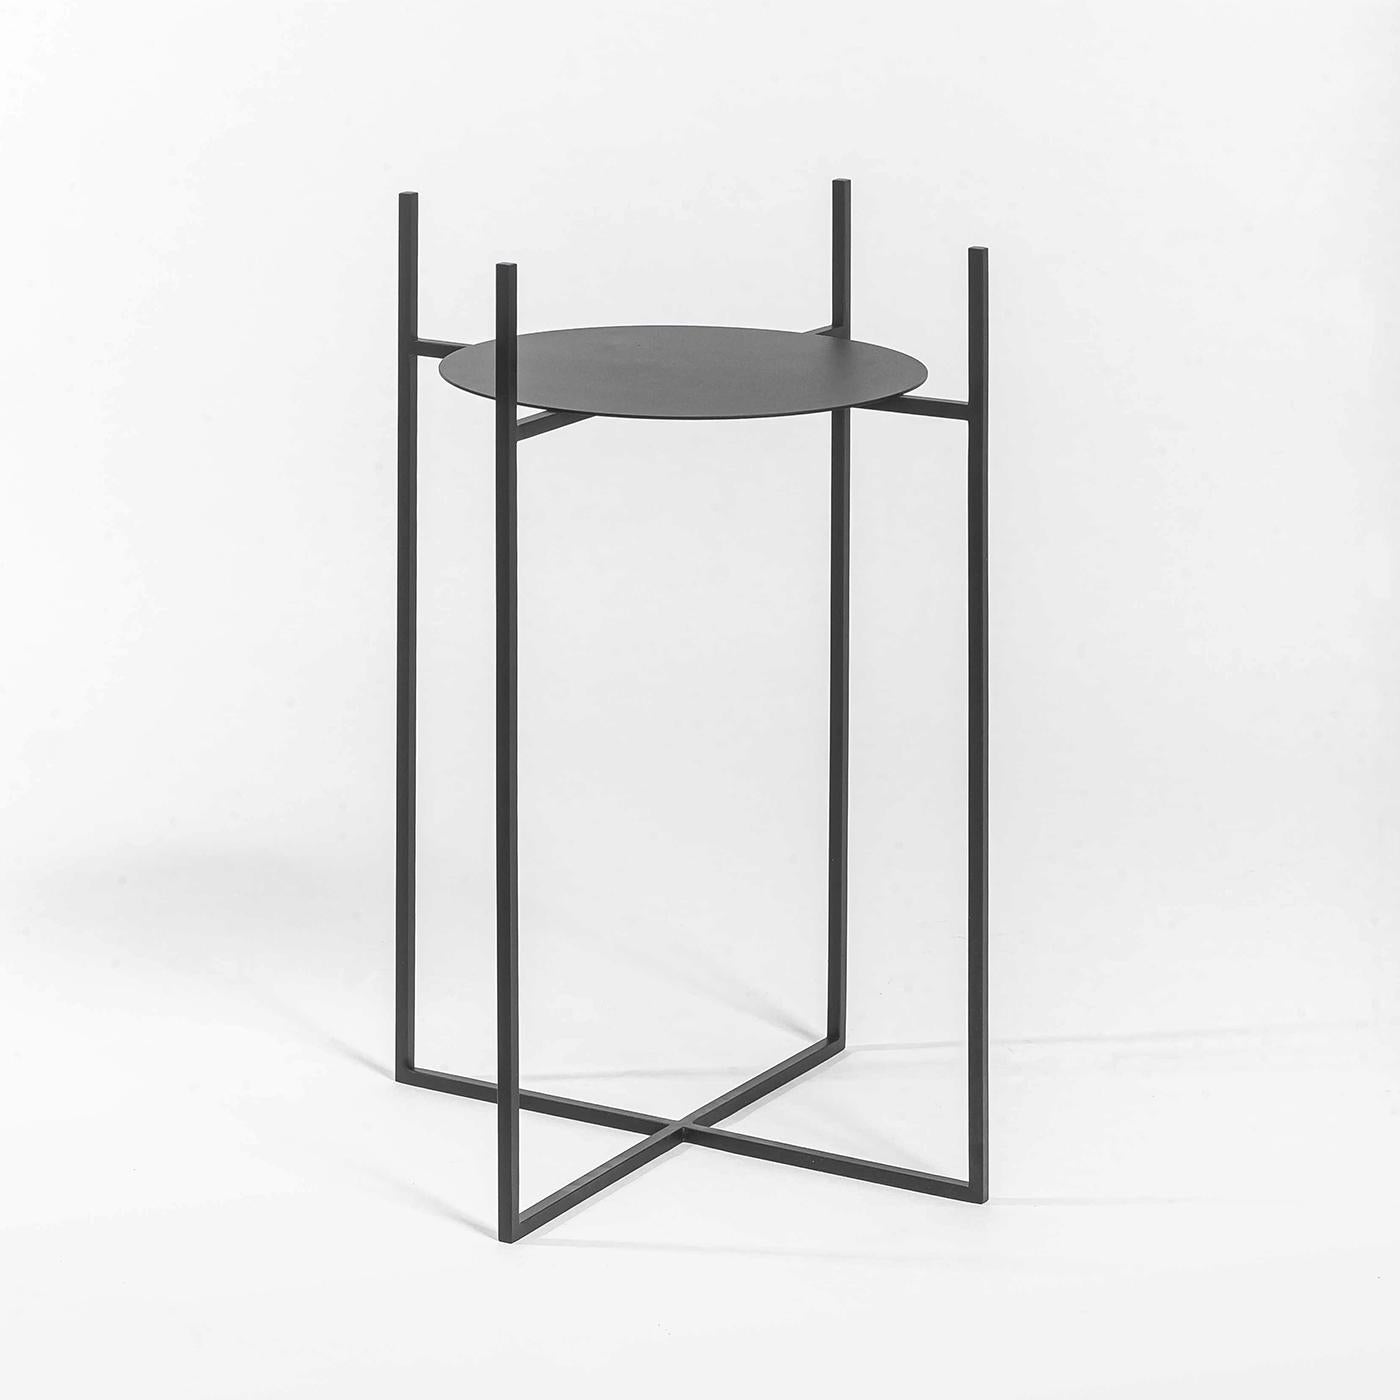 This elegant, minimalist cachepot sits atop a thin, black iron frame. It features a sophisticated exterior in hand-woven, champagne gold-colored aluminum with an interior steel structure. This medium-sized item has a total height of 90 cm, with the